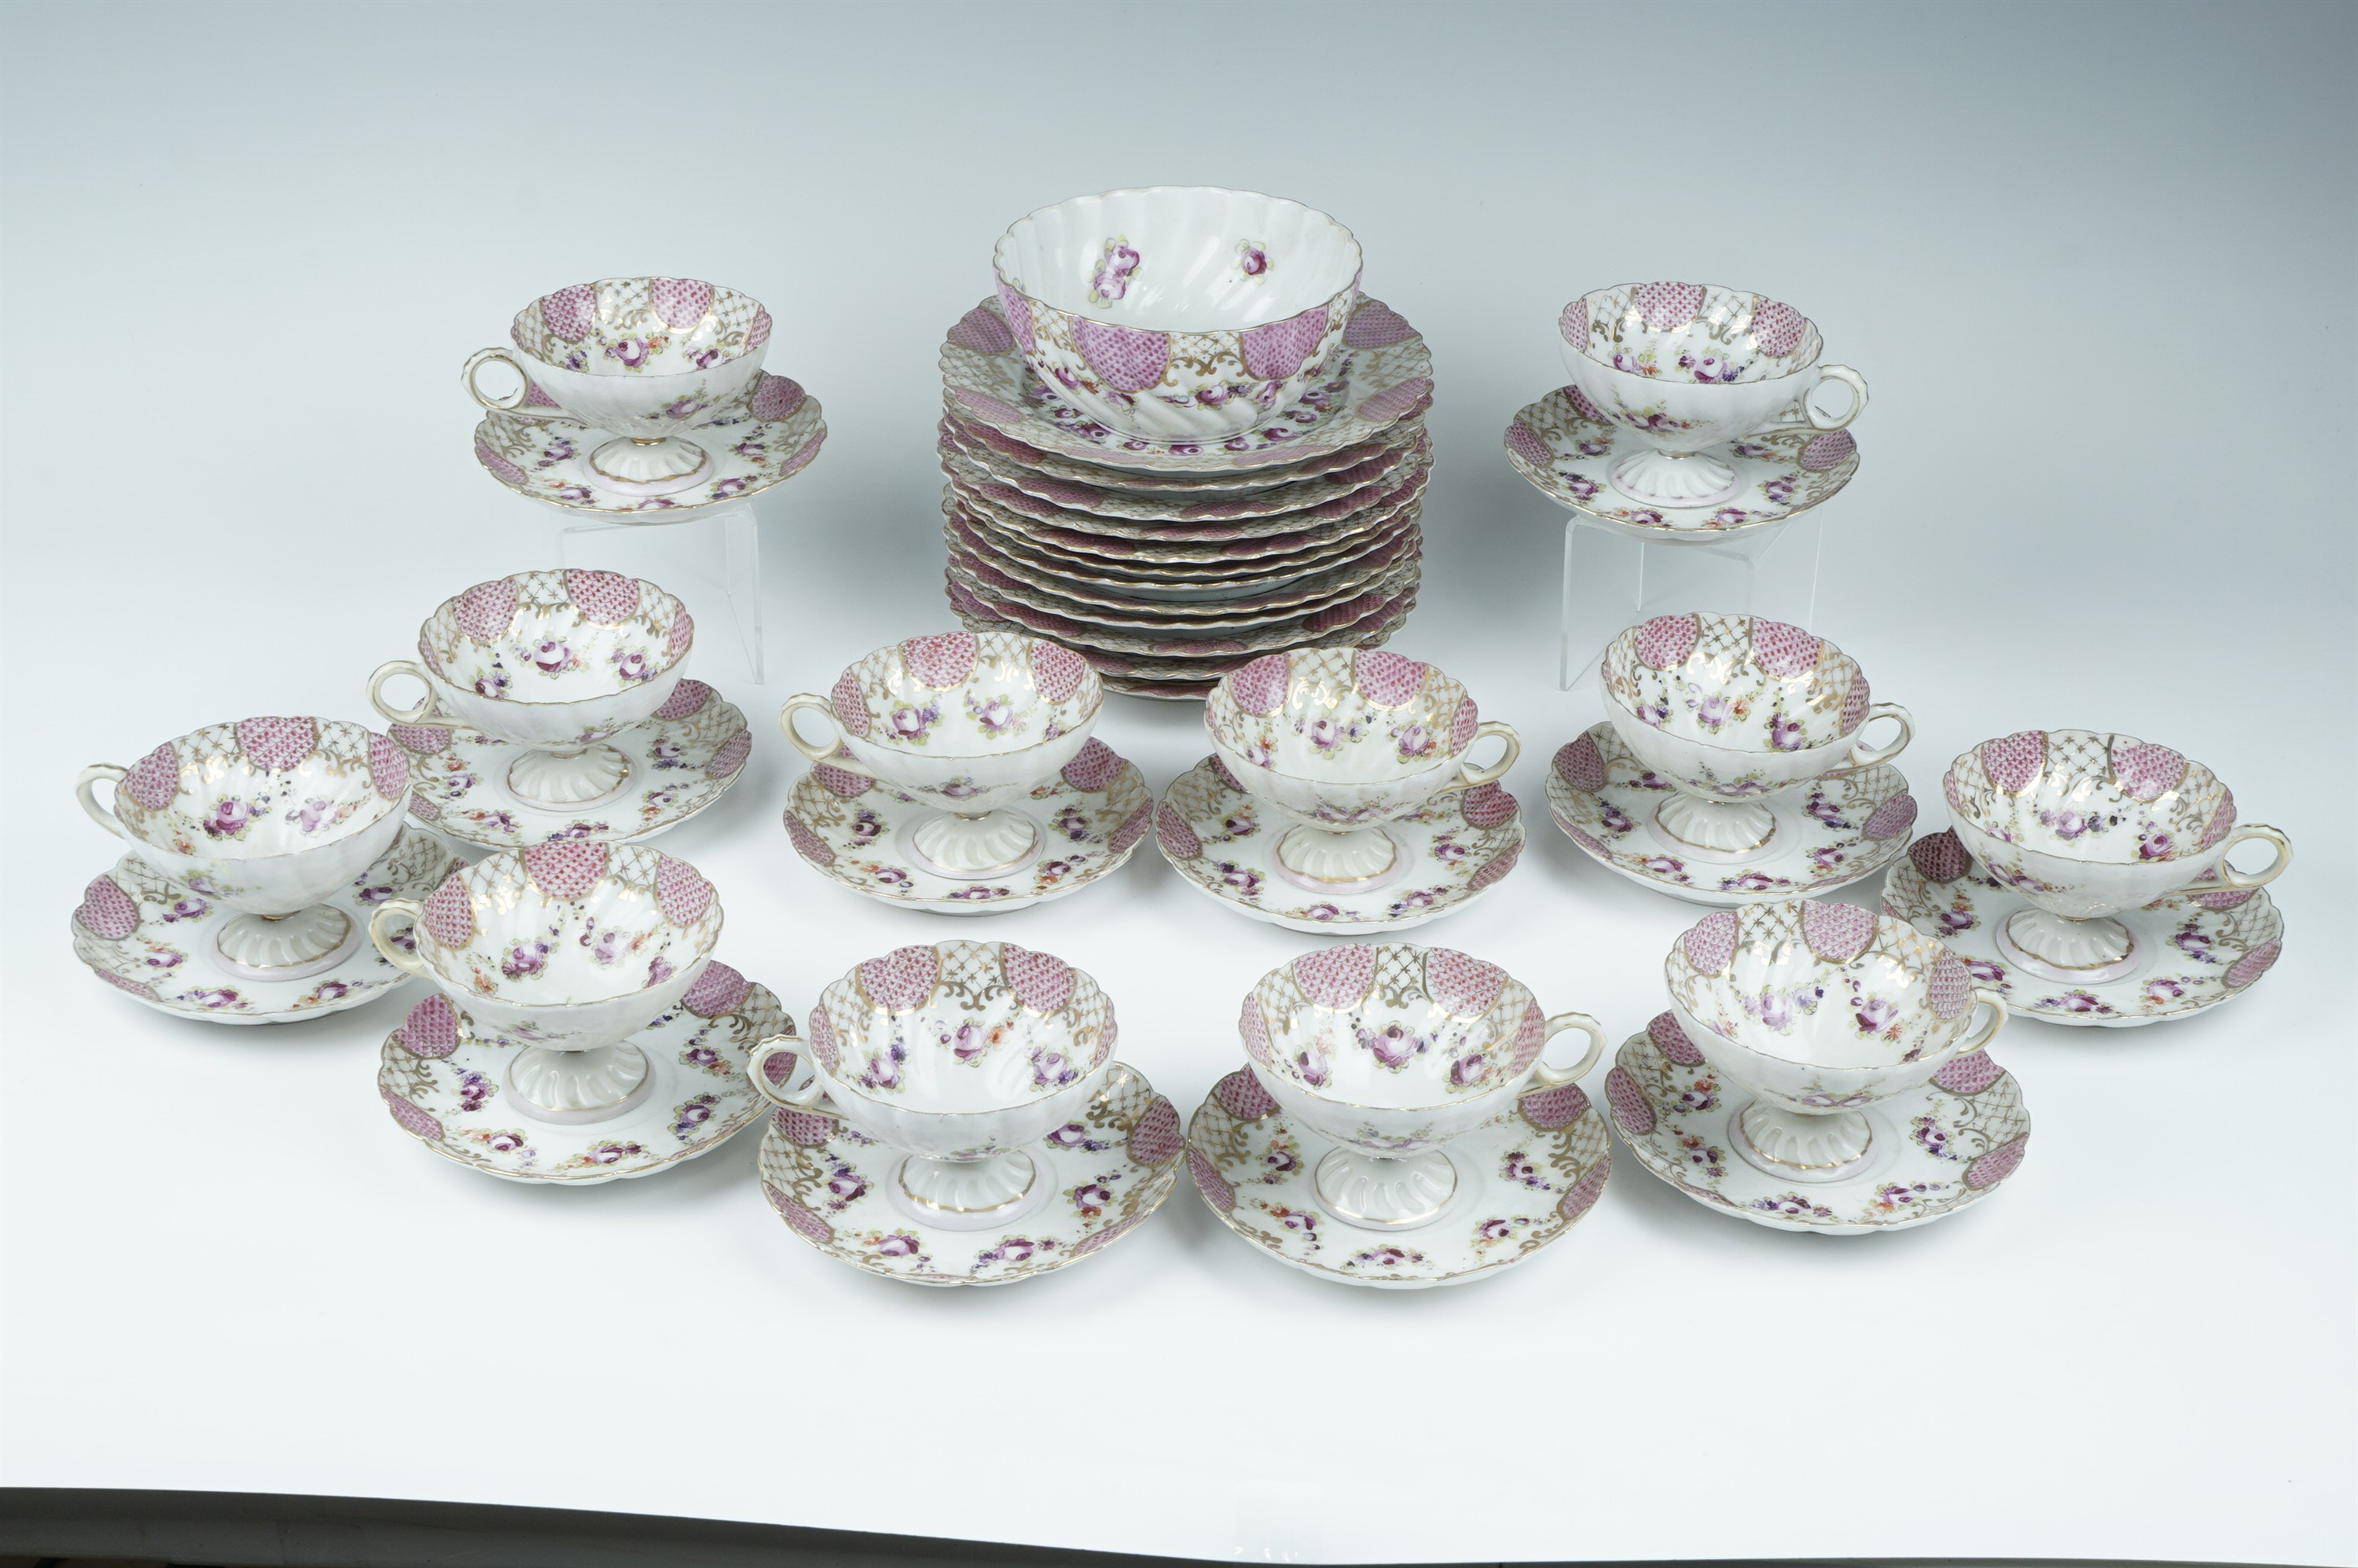 A late 19th/early 20th Century French Sevre influenced porcelain teaset, decorated in patterns of